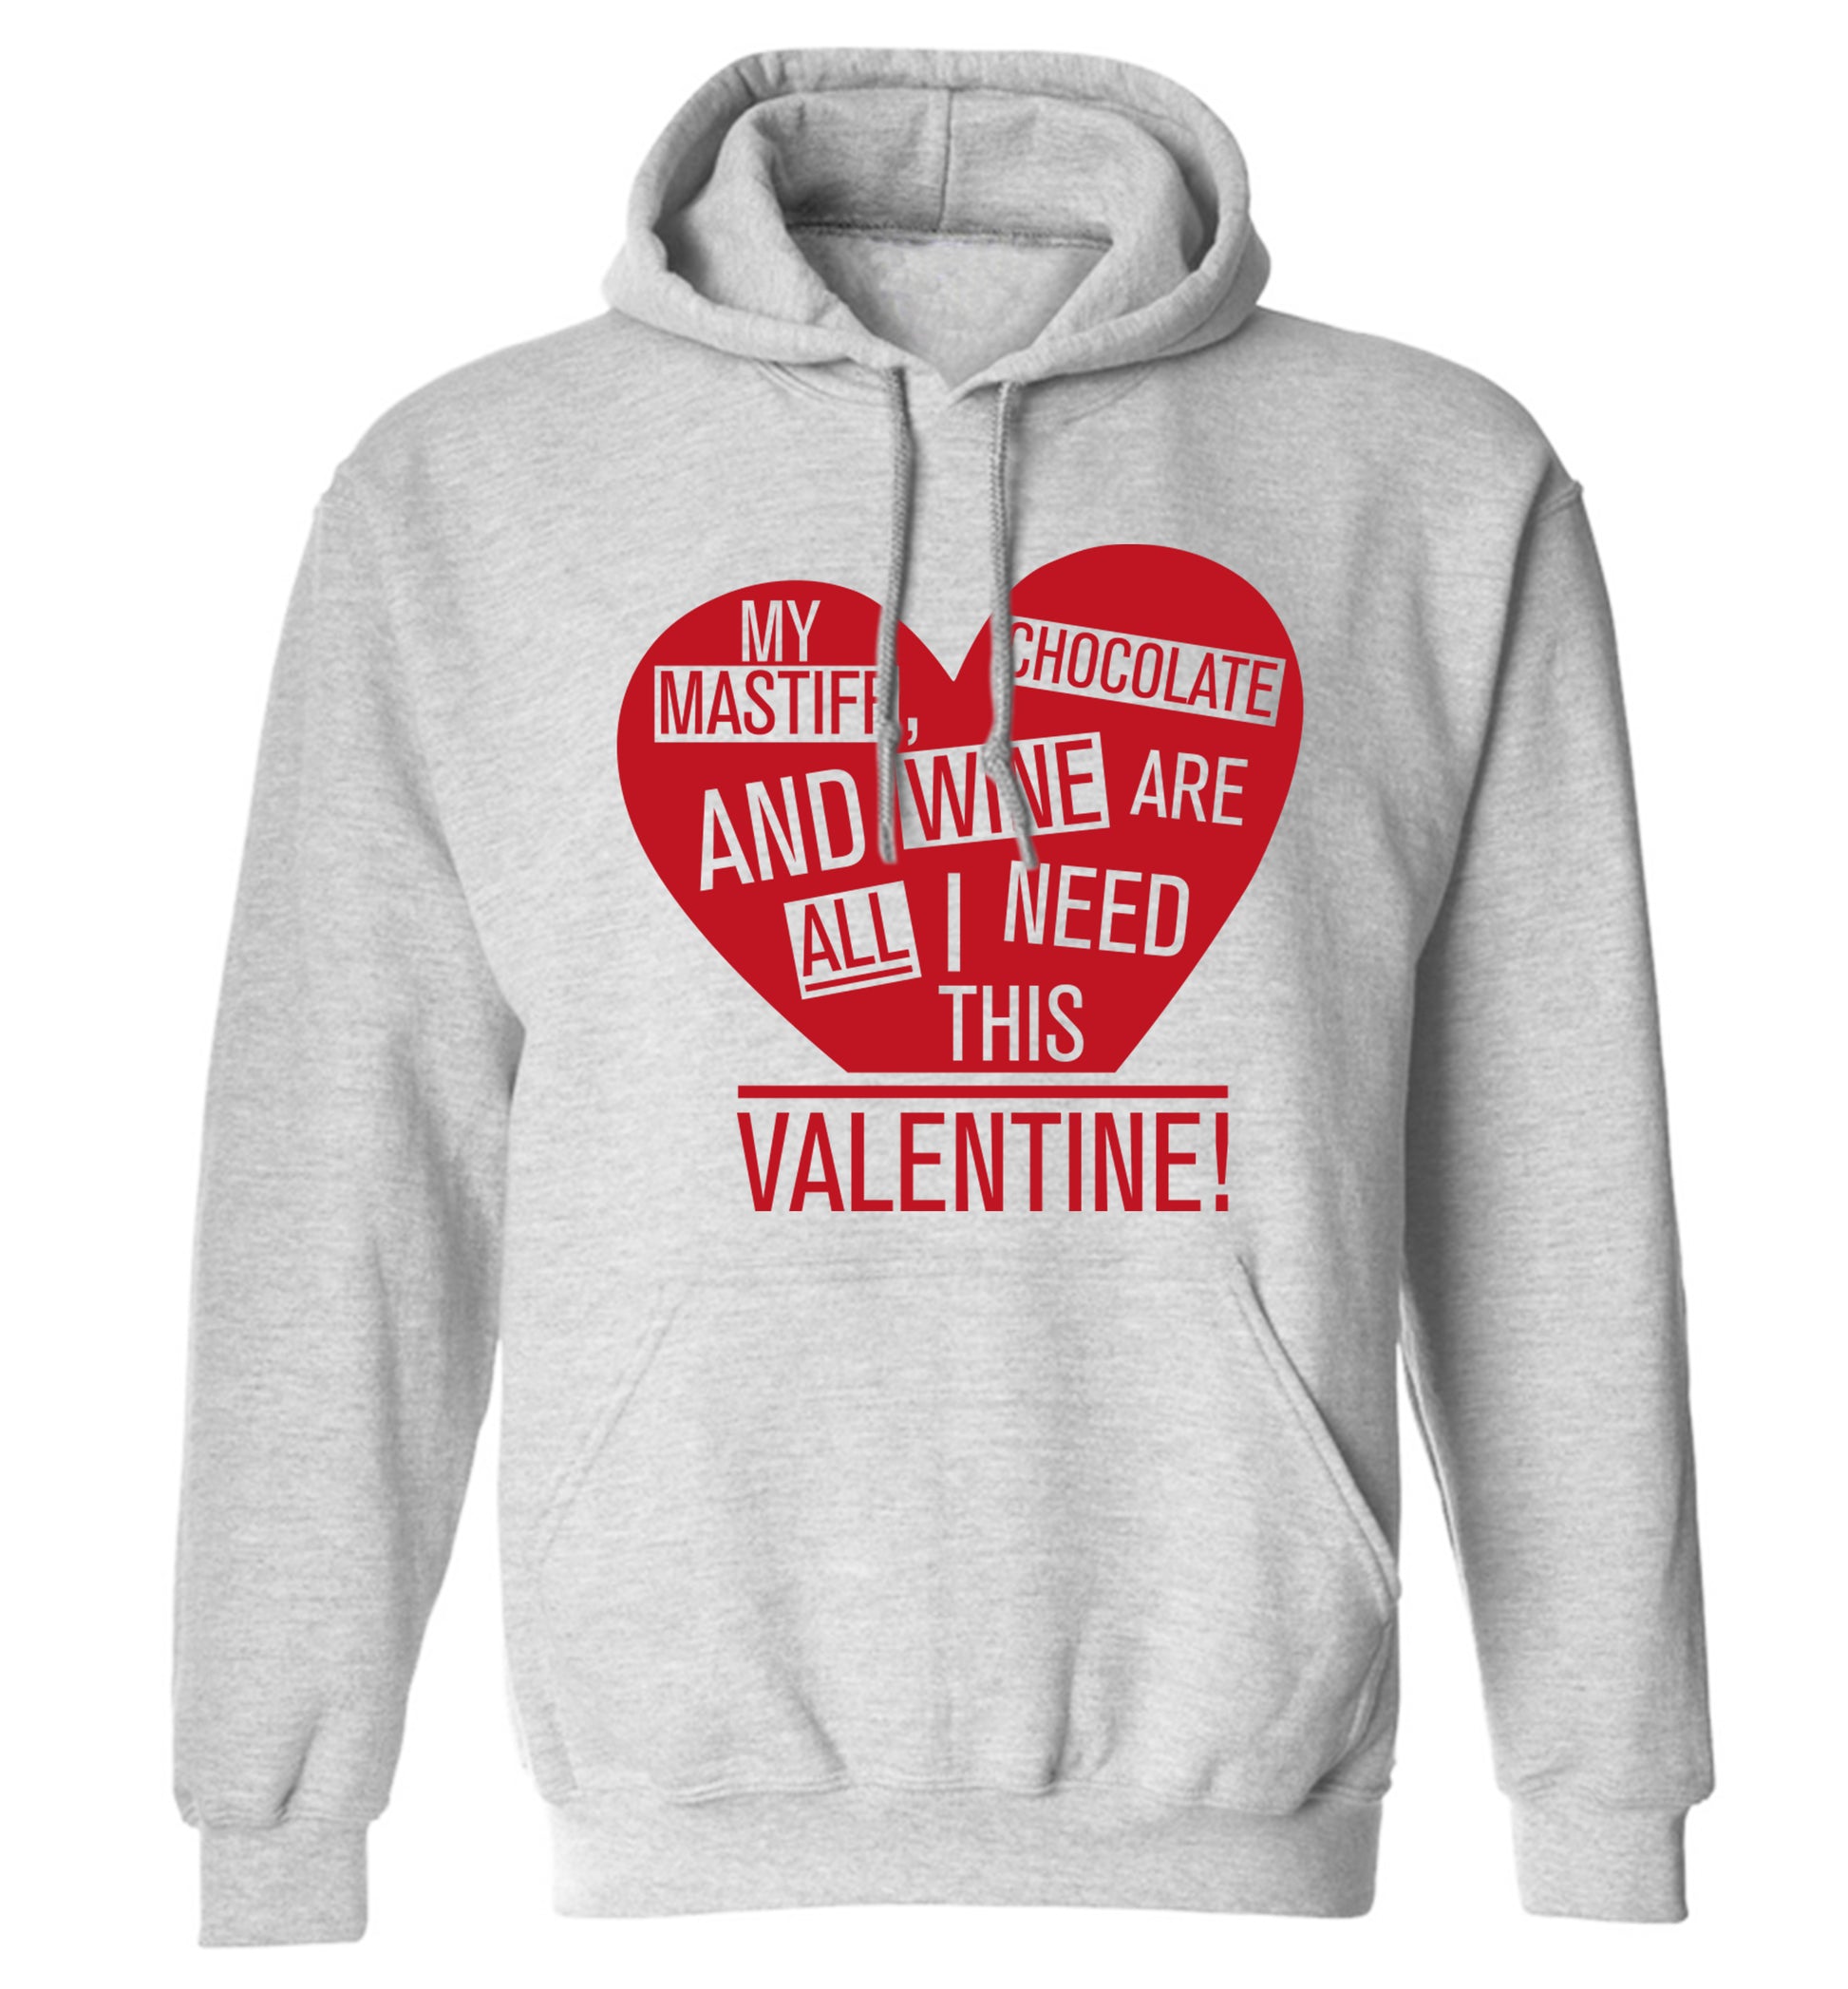 My mastiff, chocolate and wine are all I need this valentine! adults unisex grey hoodie 2XL